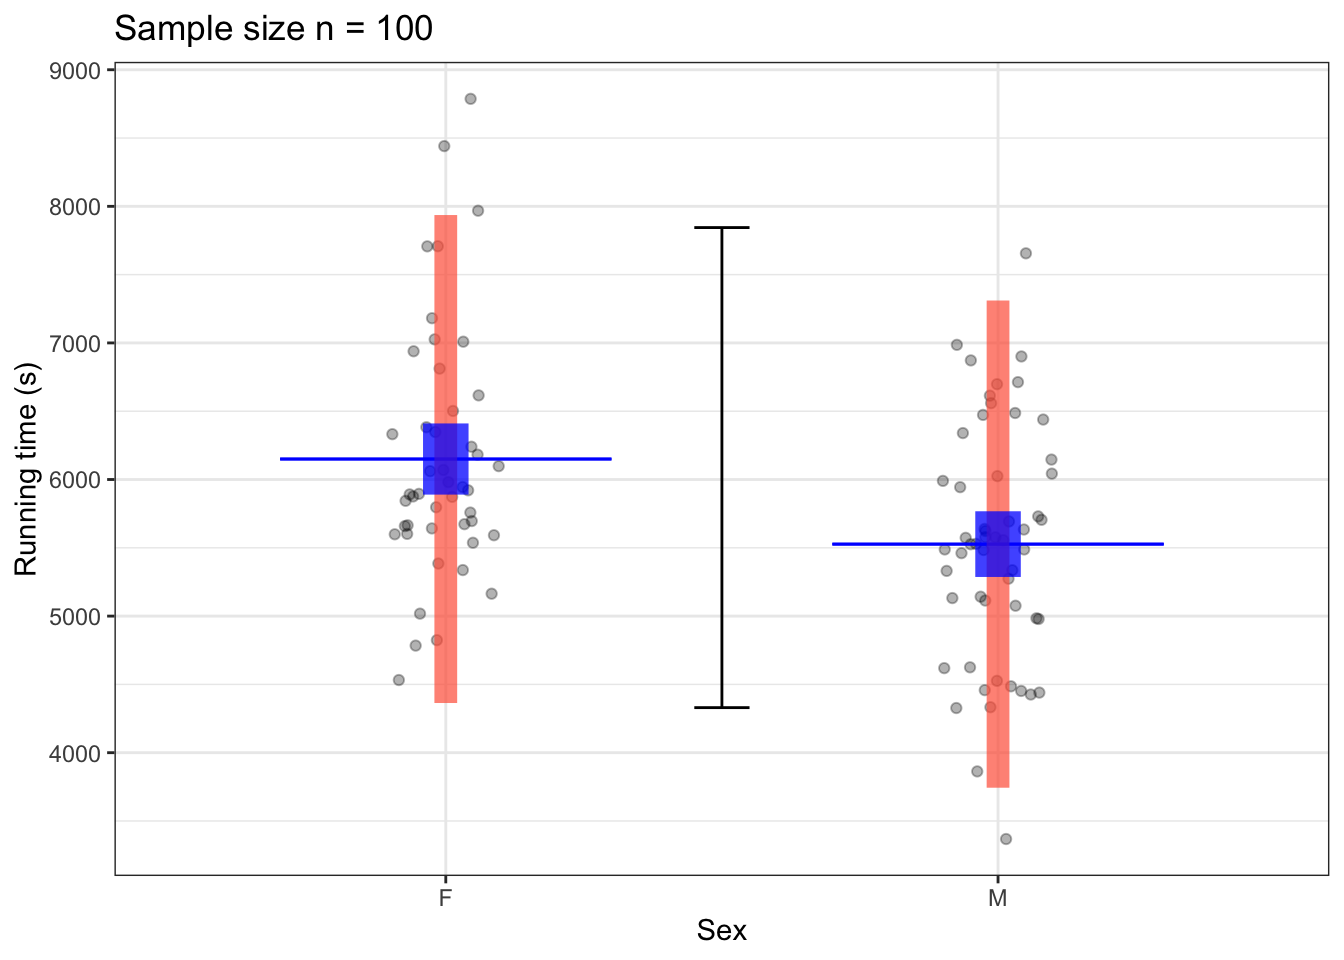 Coverage interval (black) for the variable time and prediction intervals (red bar), and confidence interval (blue bar) for the predictive model time ~ sex using samples of size n = 100 (left) and n = 1000 (right) from the TenMileRace data. The model output itself is shown as a thin blue line segment.